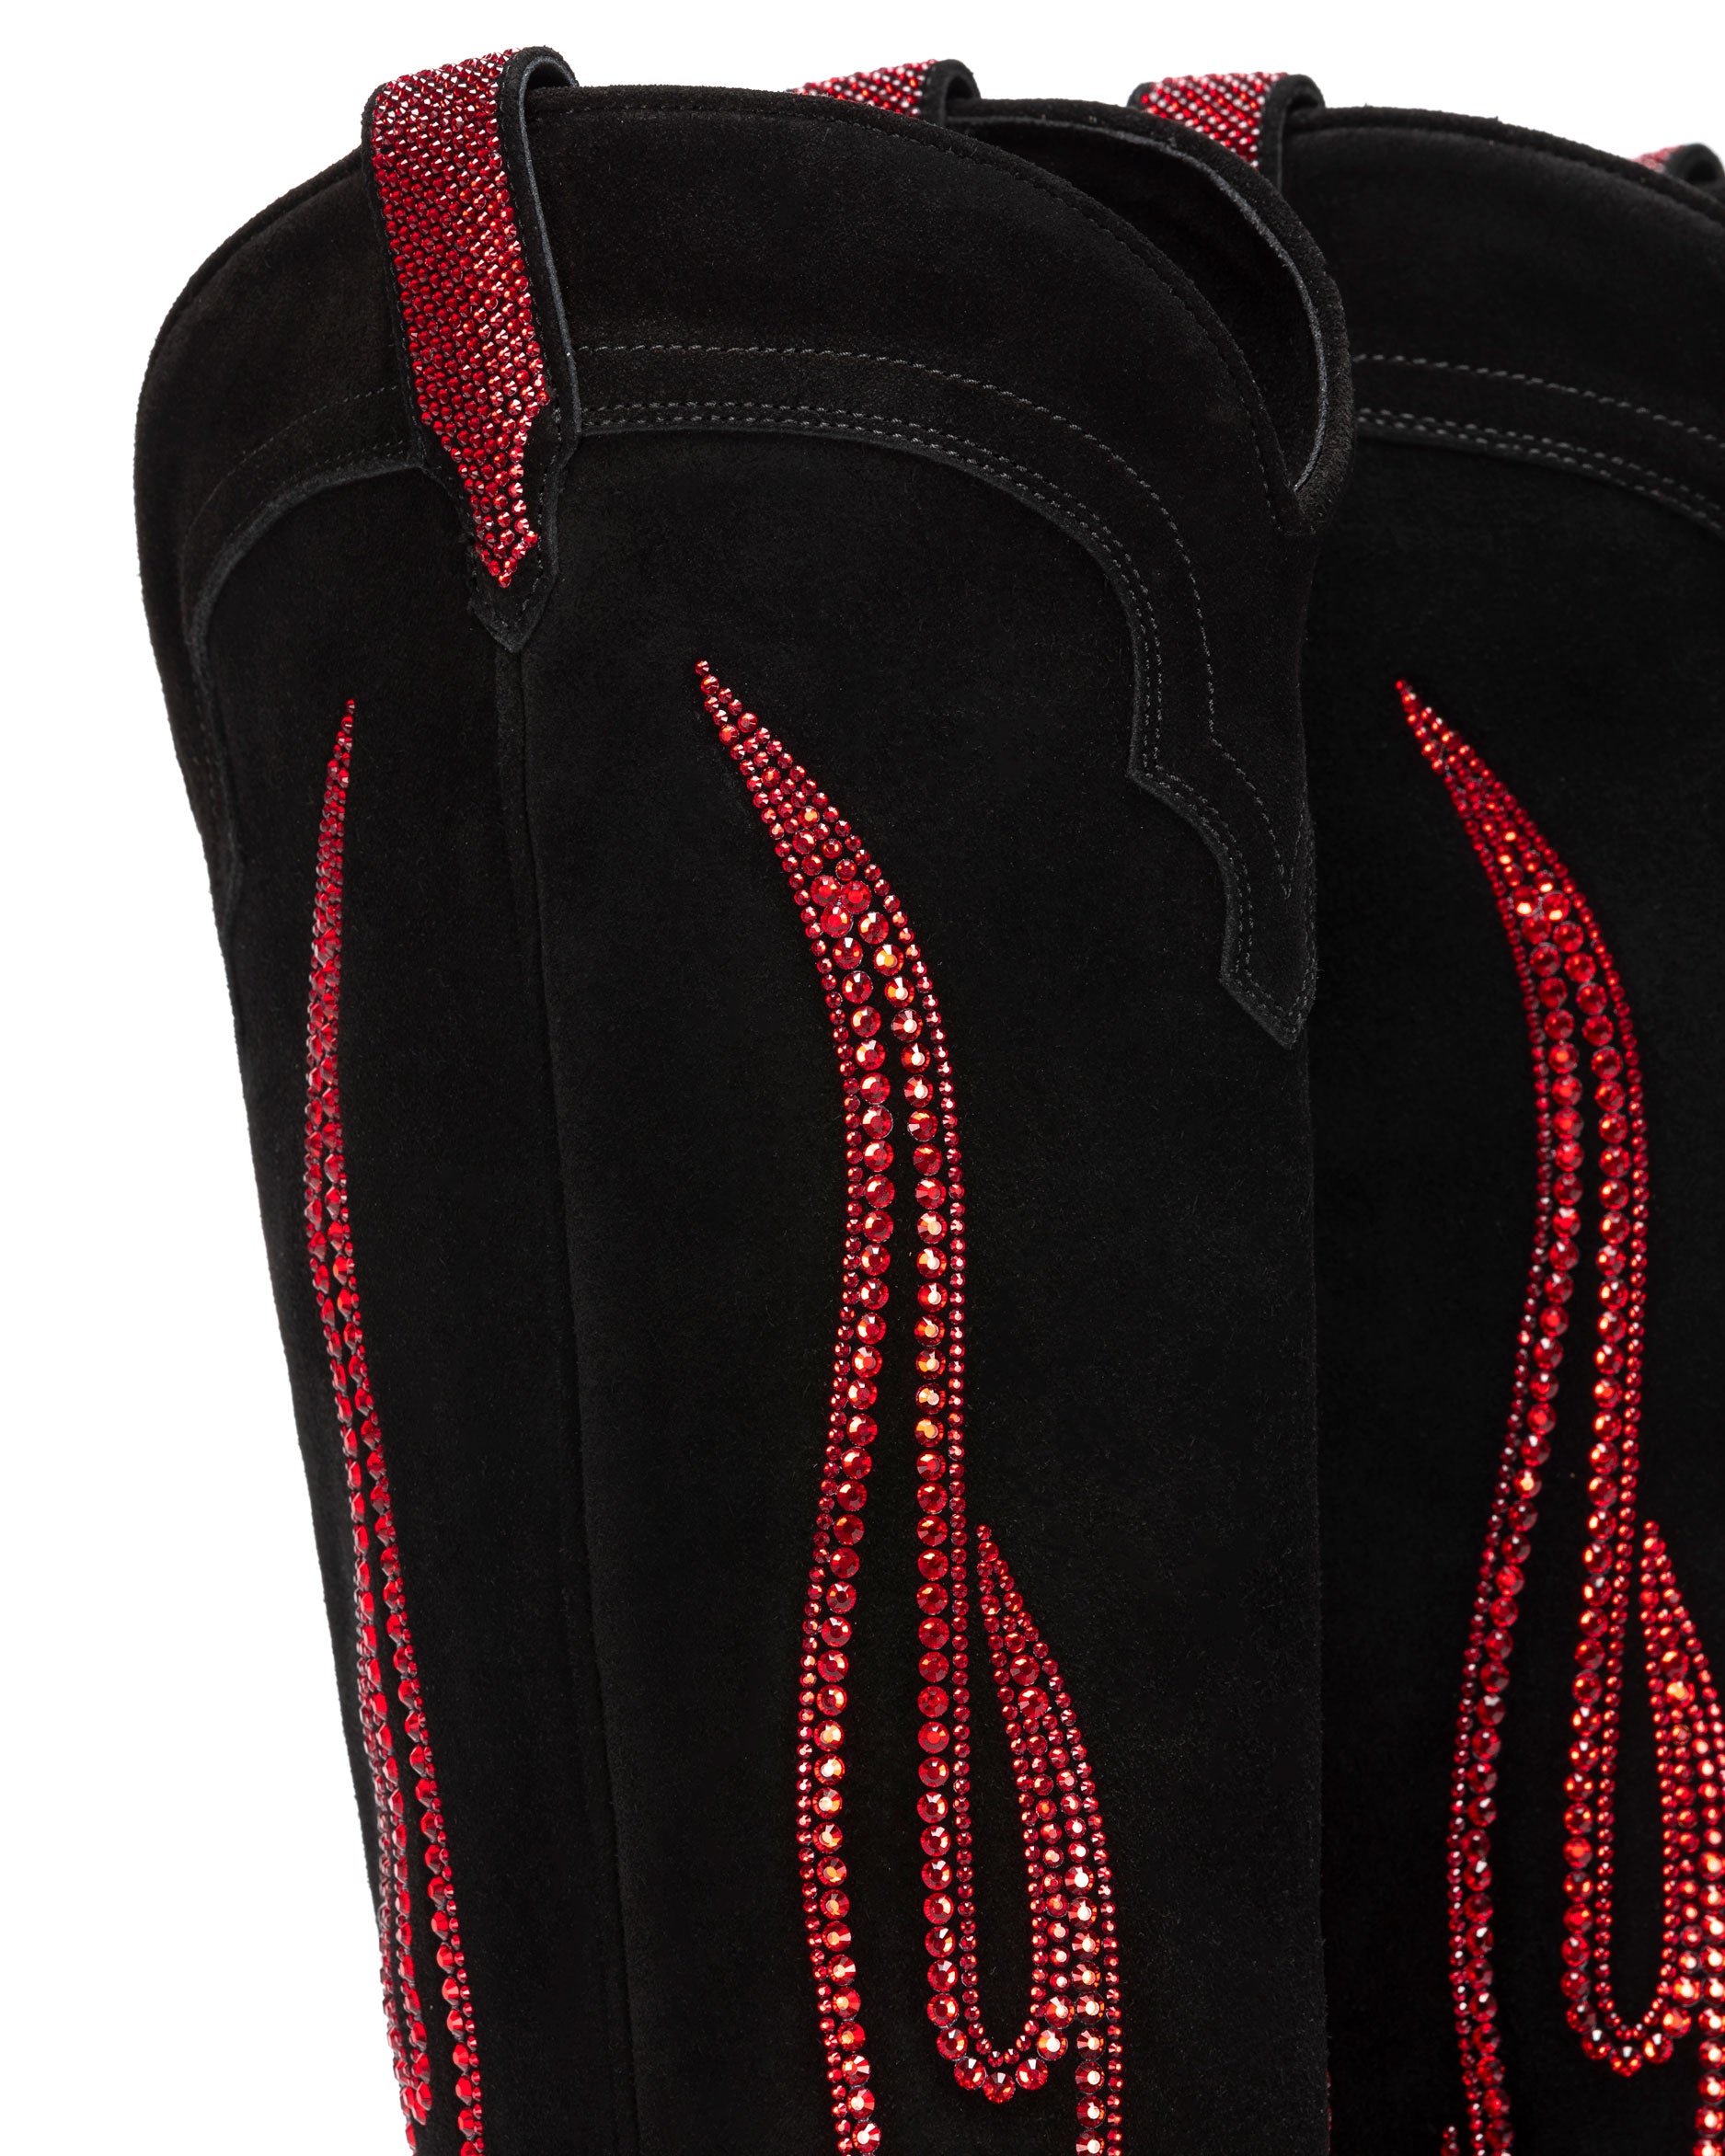     HERMOSA-90-Women_s-Over-The-Knee-Boots-in-Black-Suede-with-Red-Swarovski-Crystals_04_Detail